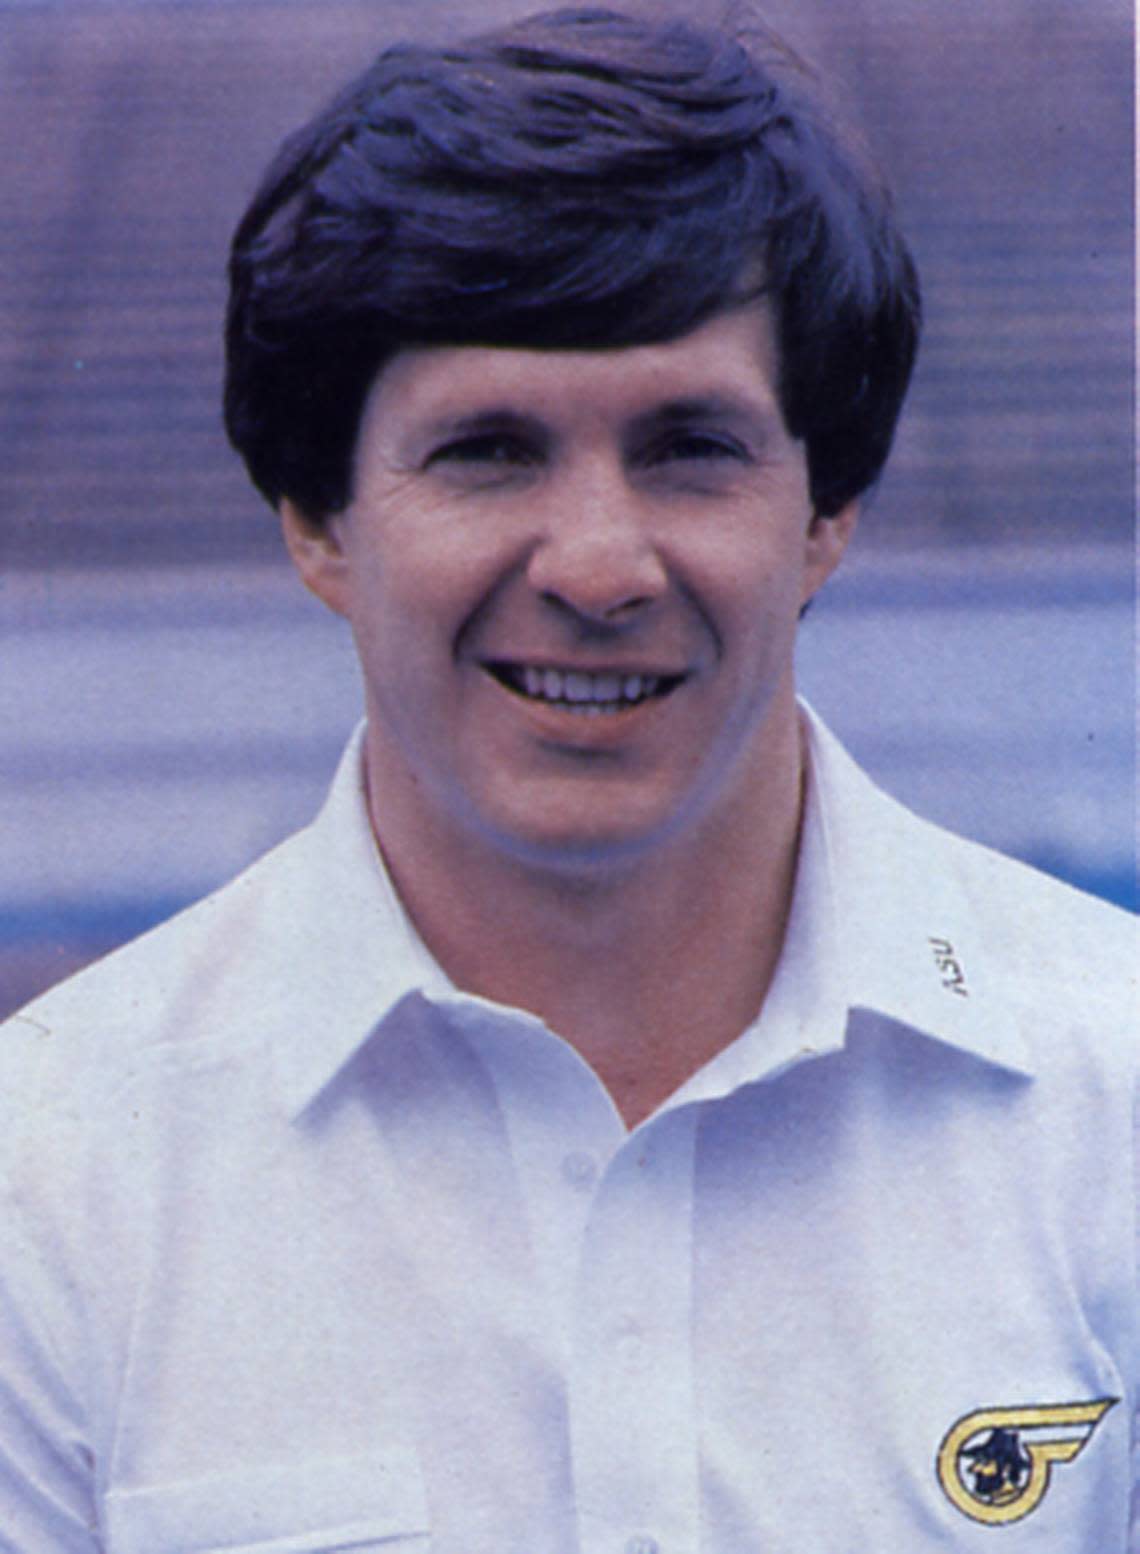 North Carolina coach Mack Brown’s mugshot from 1983 when he served as head coach at Appalachian State.